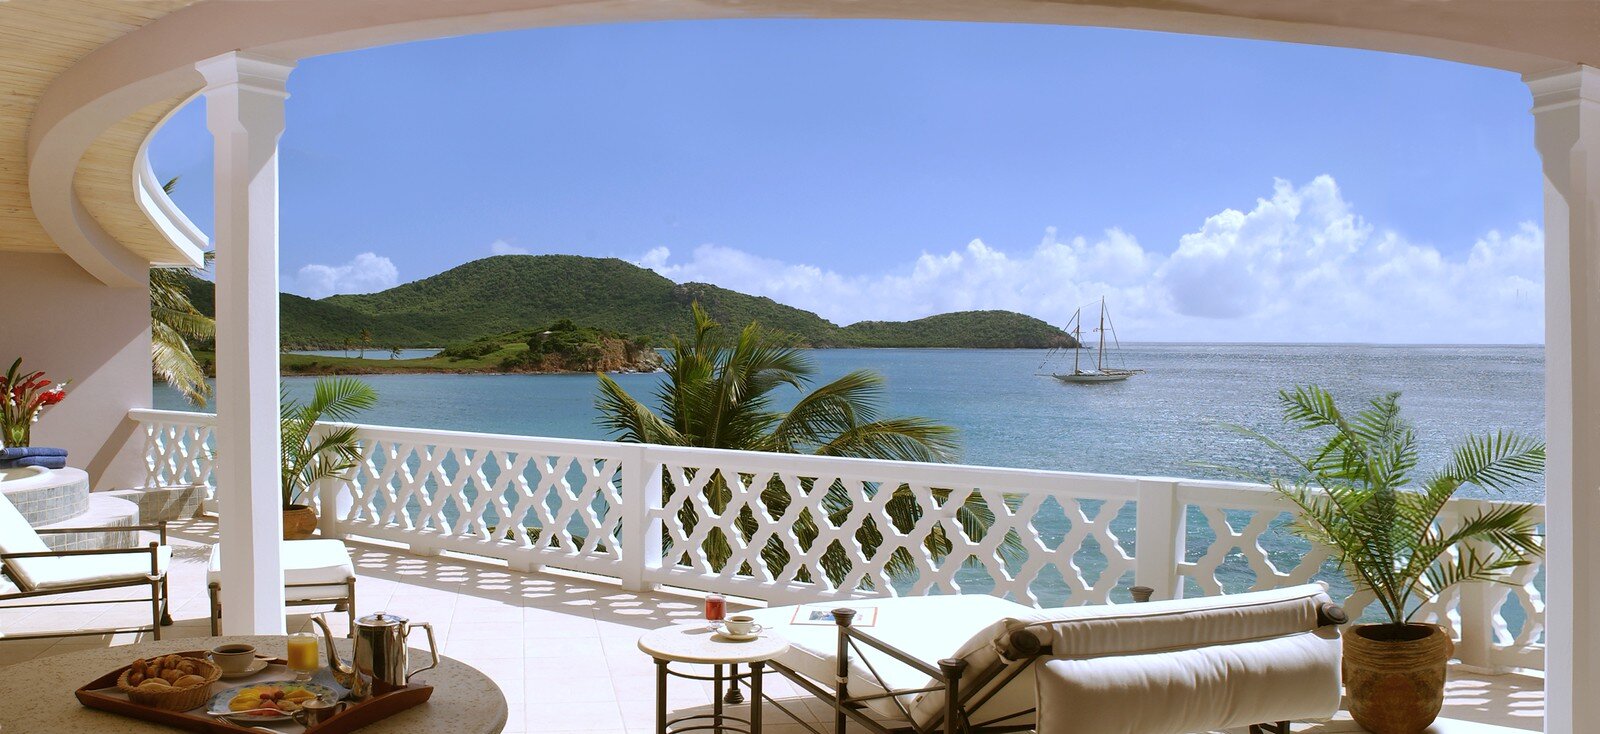   Views from the Grace Bay Suite (photo credit: Rebecca Recommends)  